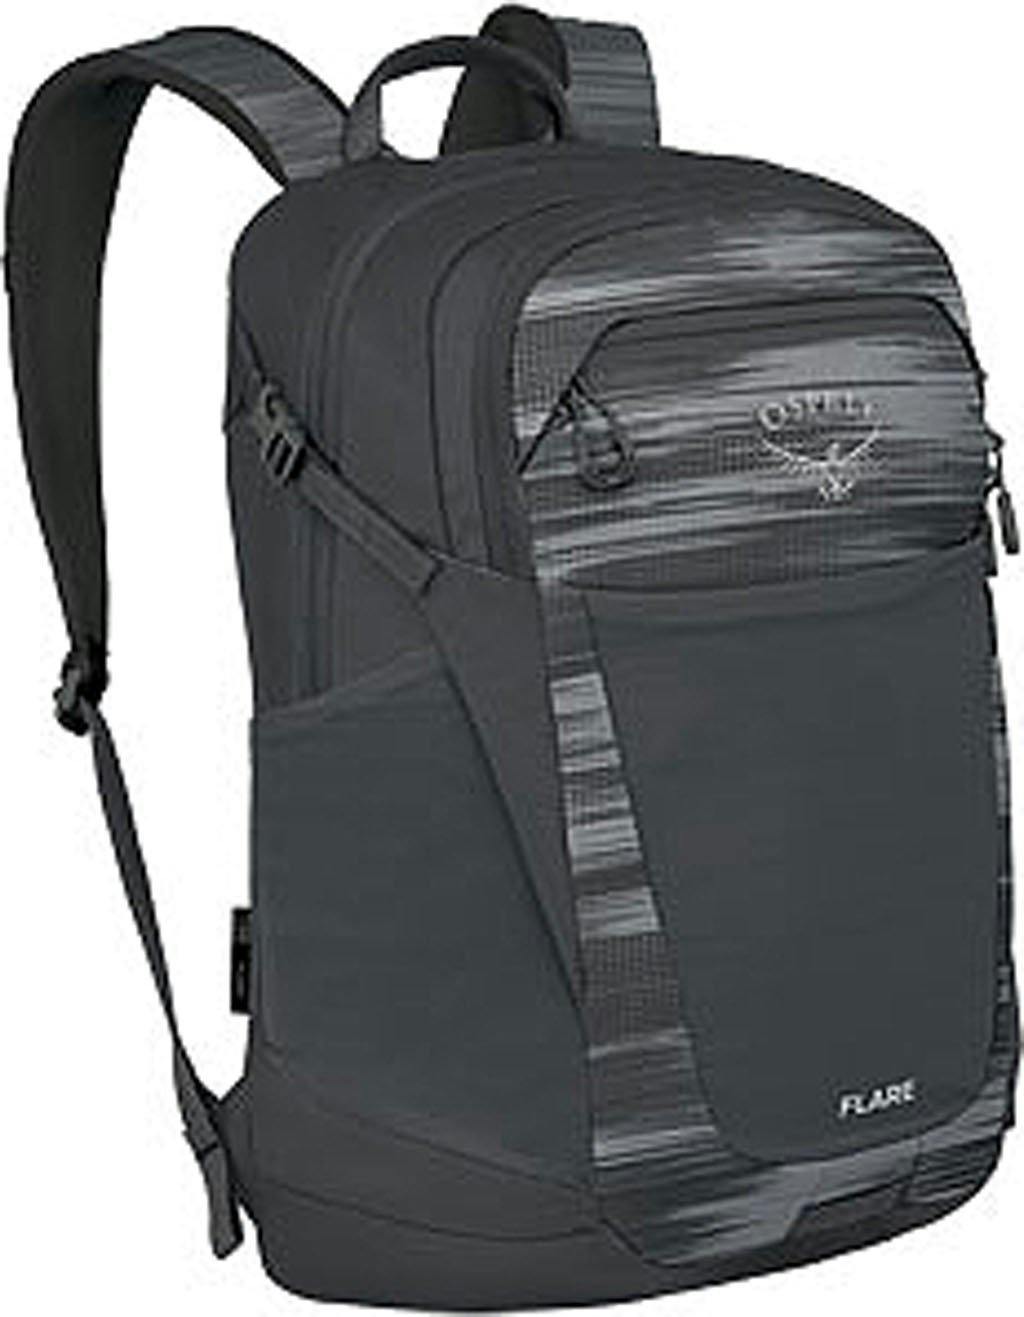 Product image for Flare Backpack 27L